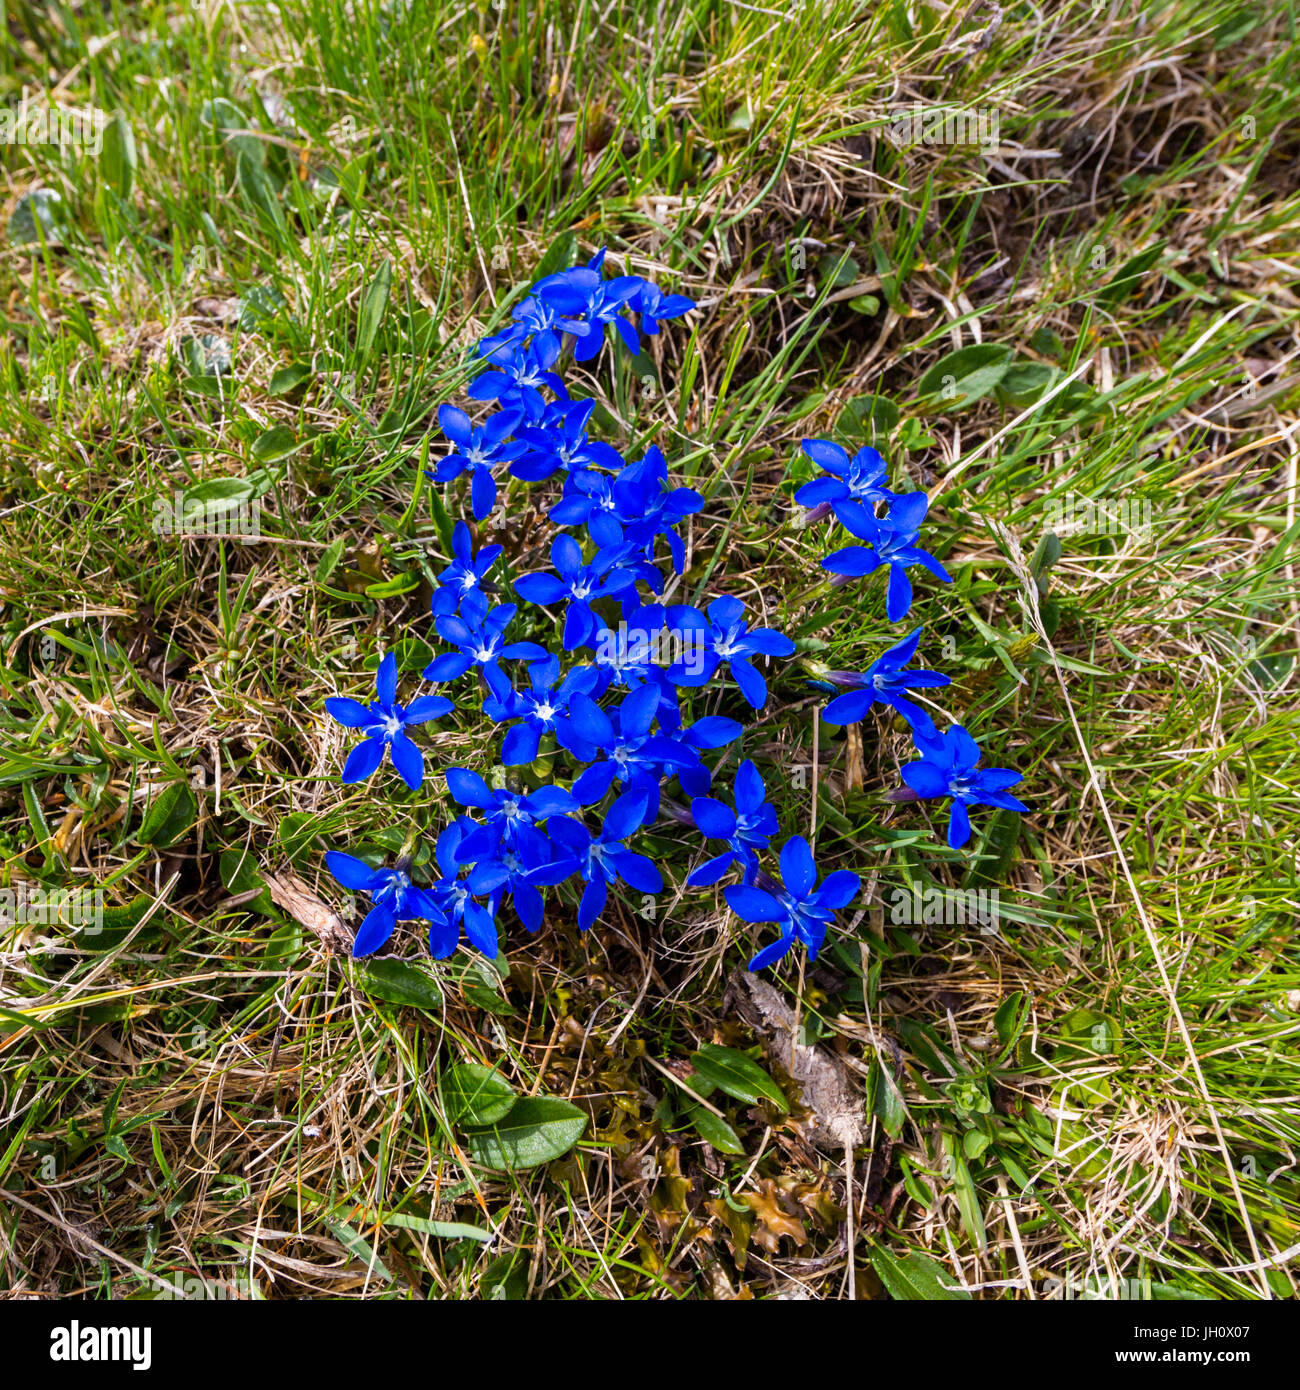 many natural deep blue blooms of gentian flower in green grass Stock Photo